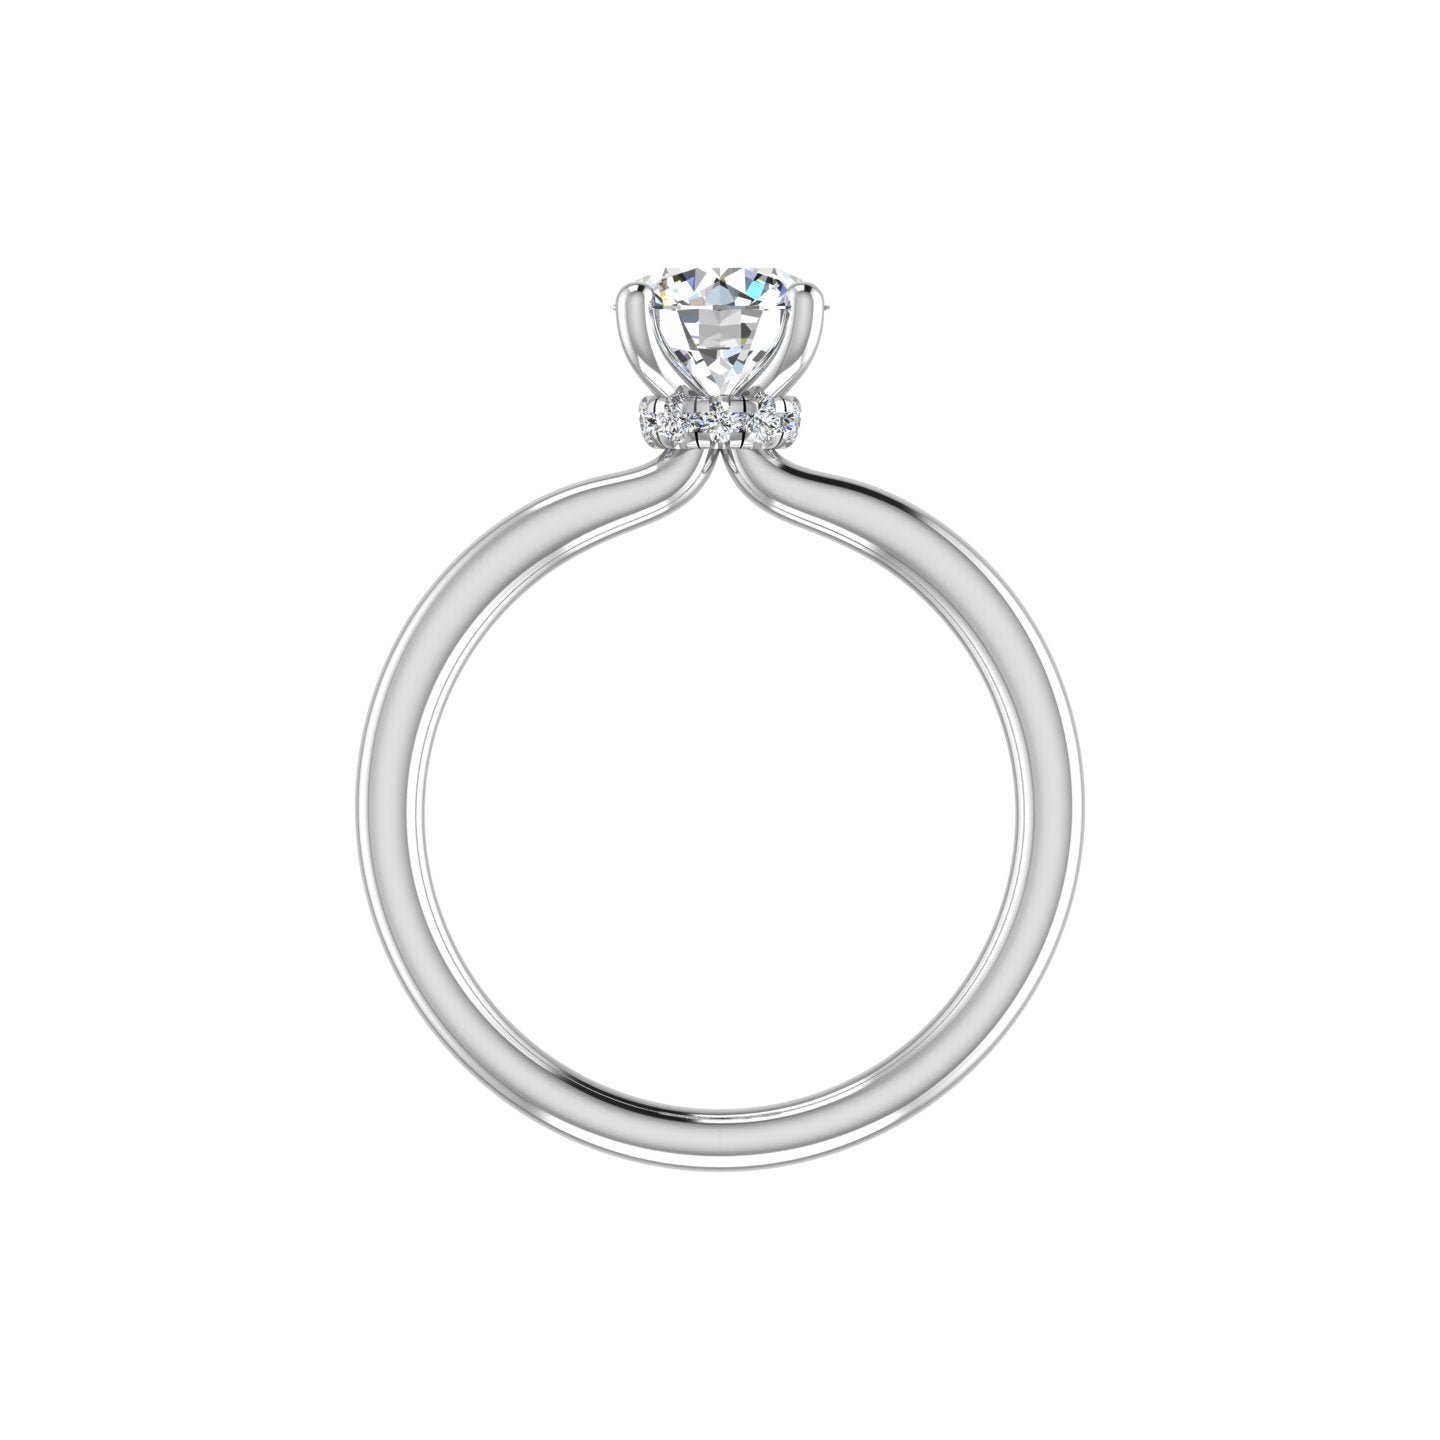 Sienna Solitaire Engagement Ring with Moissanite (7344651763896)